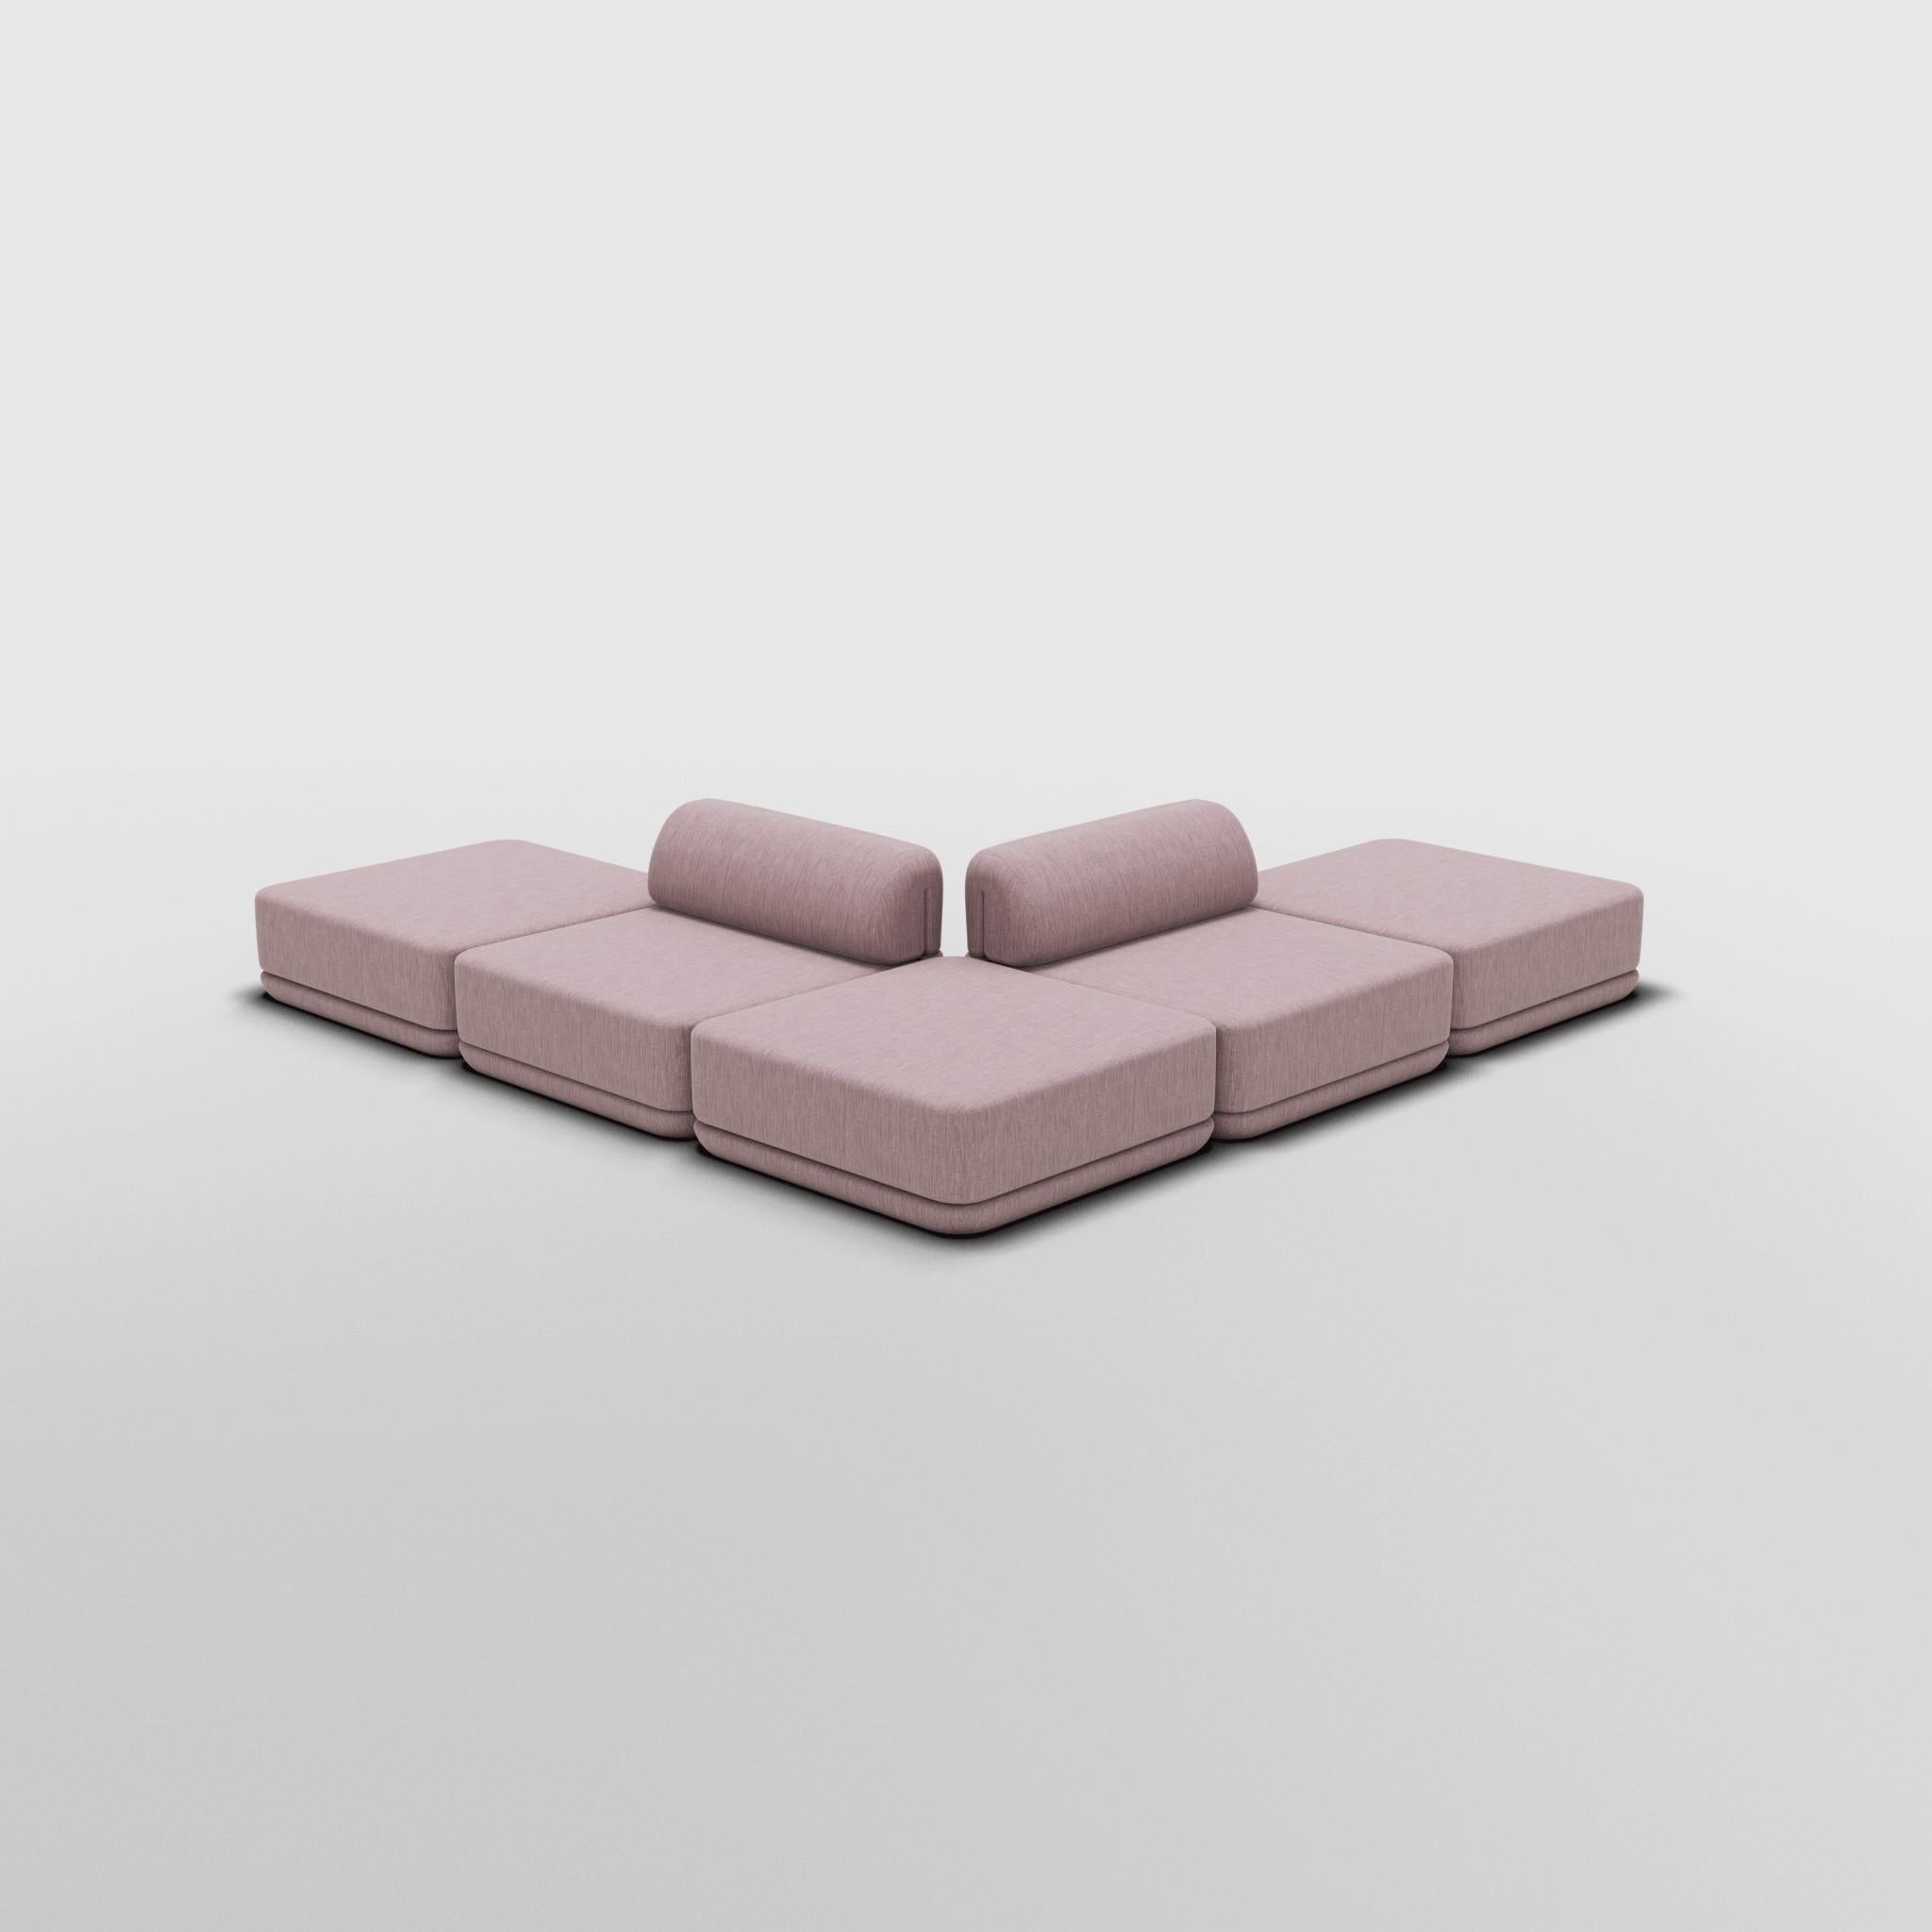 Ottoman Mix Sectional - Inspired by 70s Italian Luxury Furniture

Discover The Cube Sofa, where art meets adaptability. Its sculptural design and customizable comfort create endless possibilities for your living space. Make a statement, elevate your